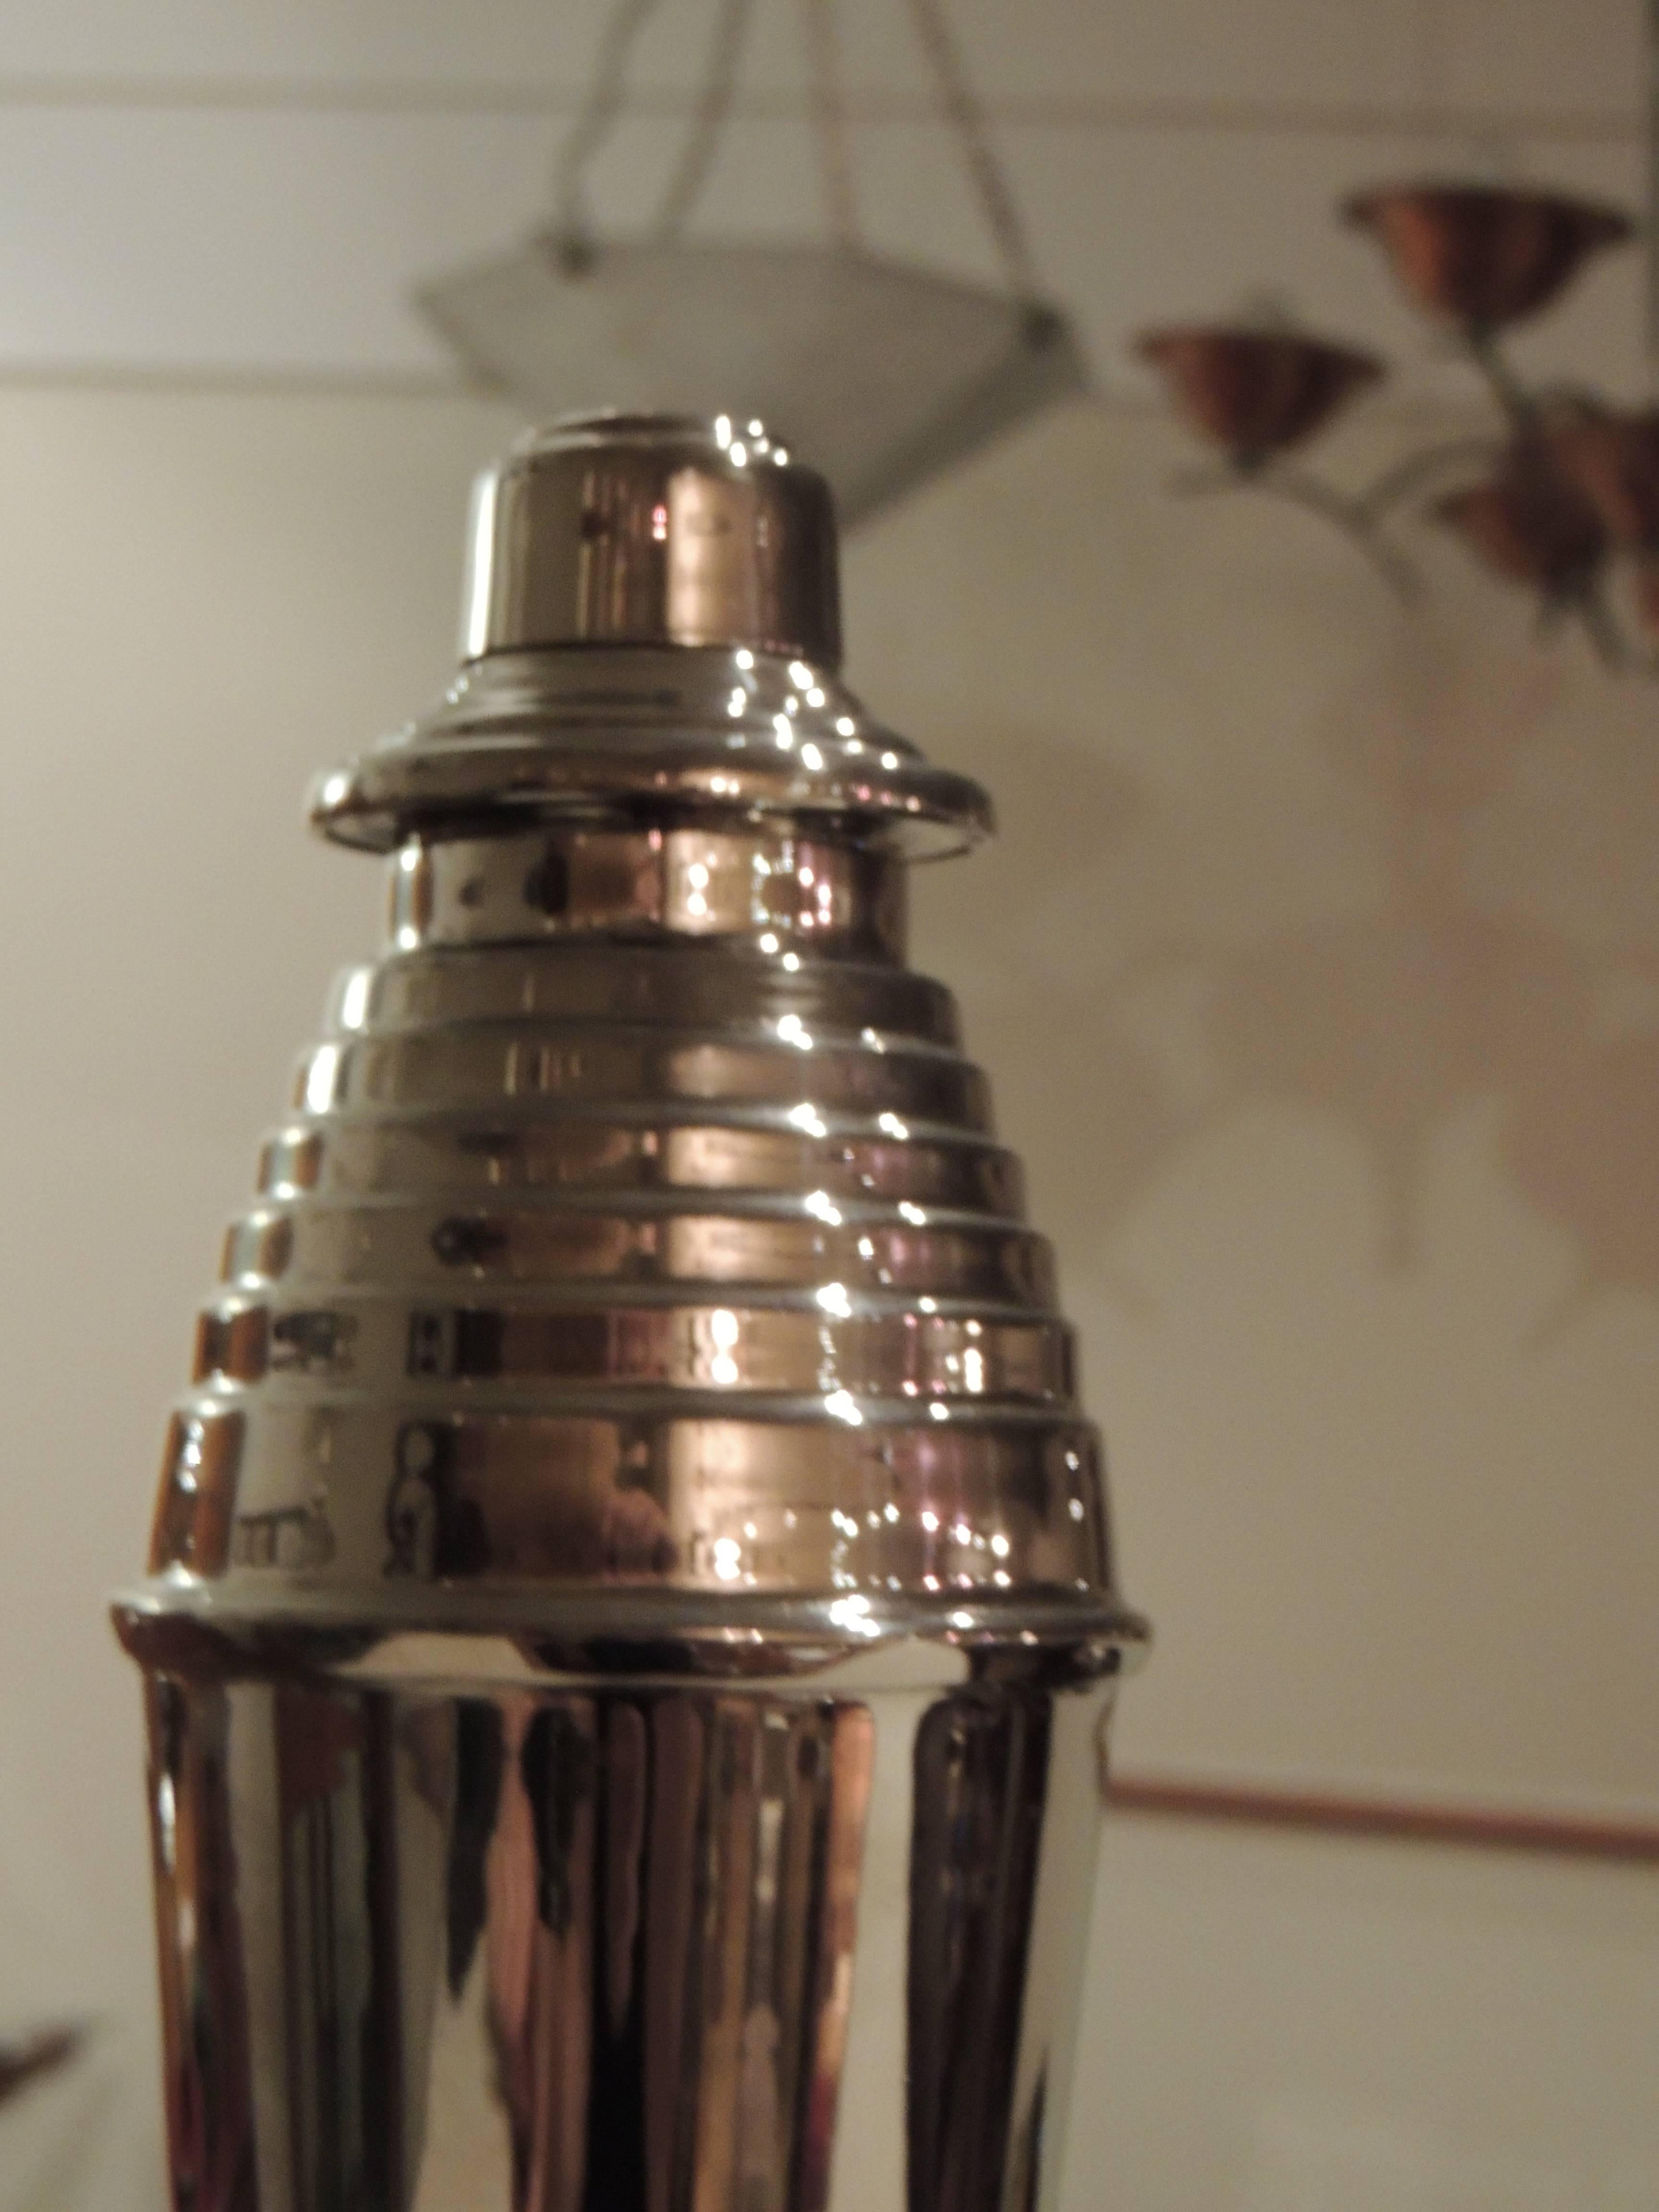 This great Art Deco cocktail shaker has the stepped up design that evokes the feeling of the Chrysler Building, of Flash Gordon, of rocket ships and of so many “futuristic” designs from that period. Nicely silver plated, with an unusual perforated